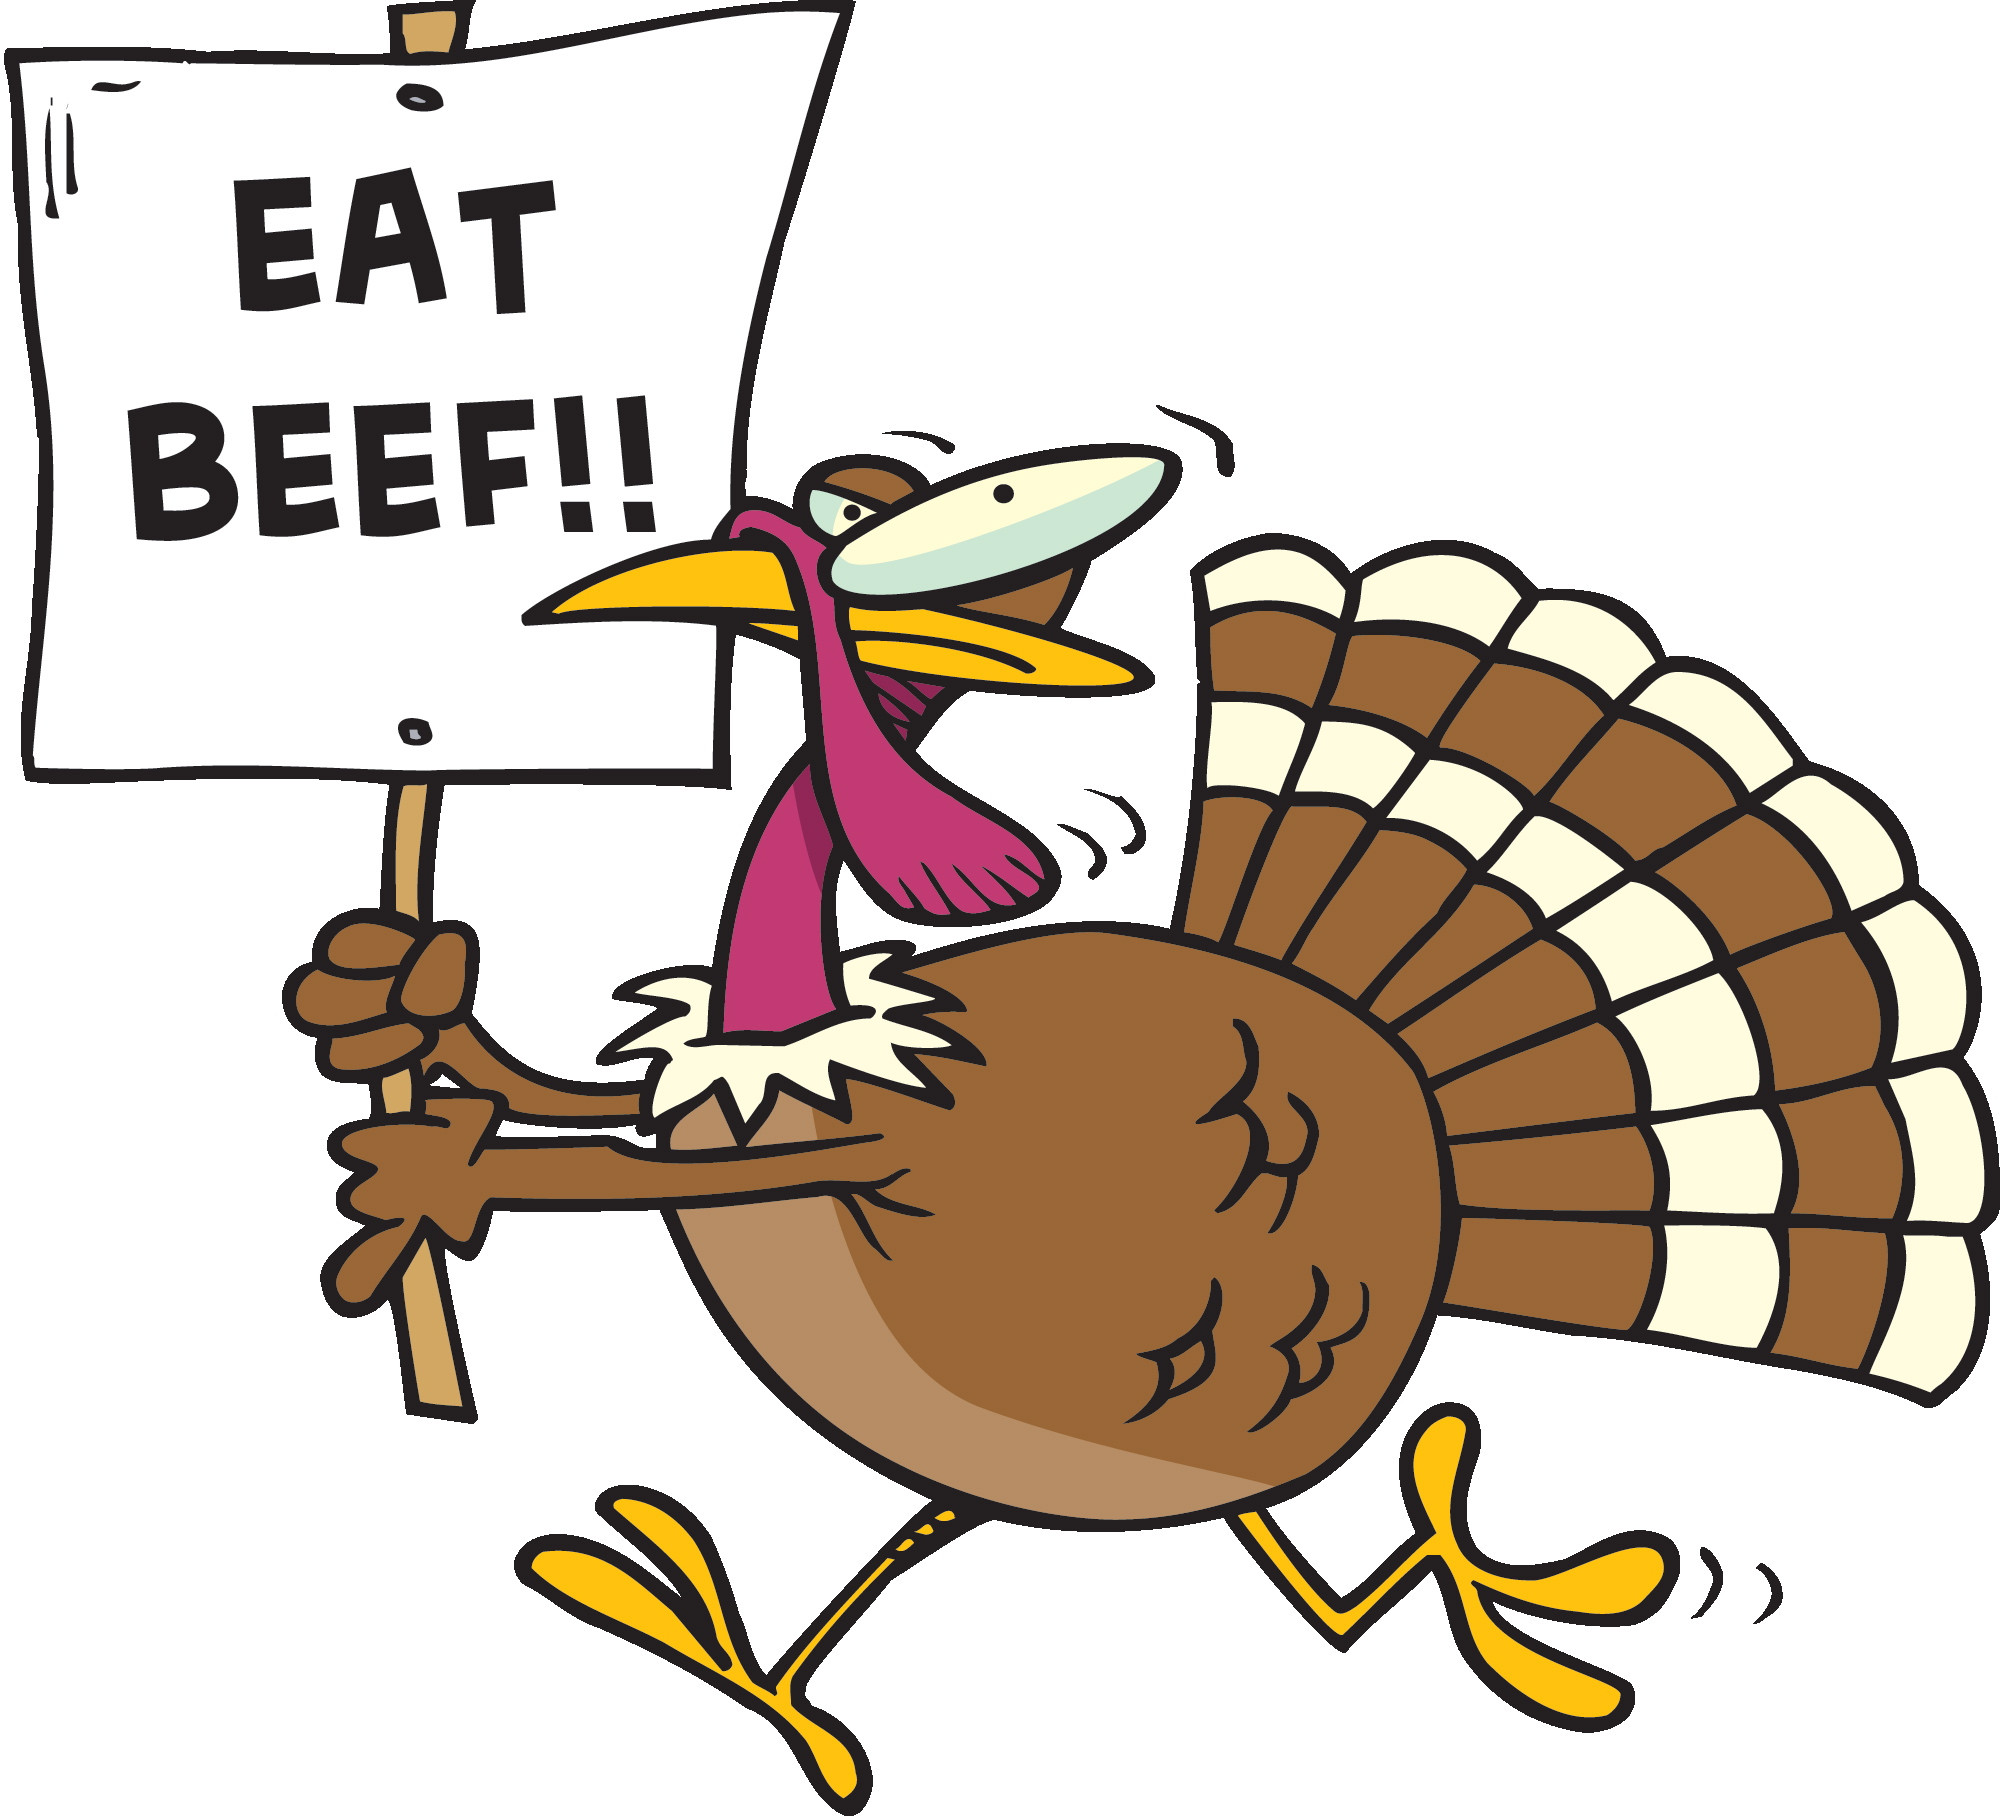 Funny Turkey Pics For Thanksgiving
 Eat Beef Funny Turkey Clipart Image